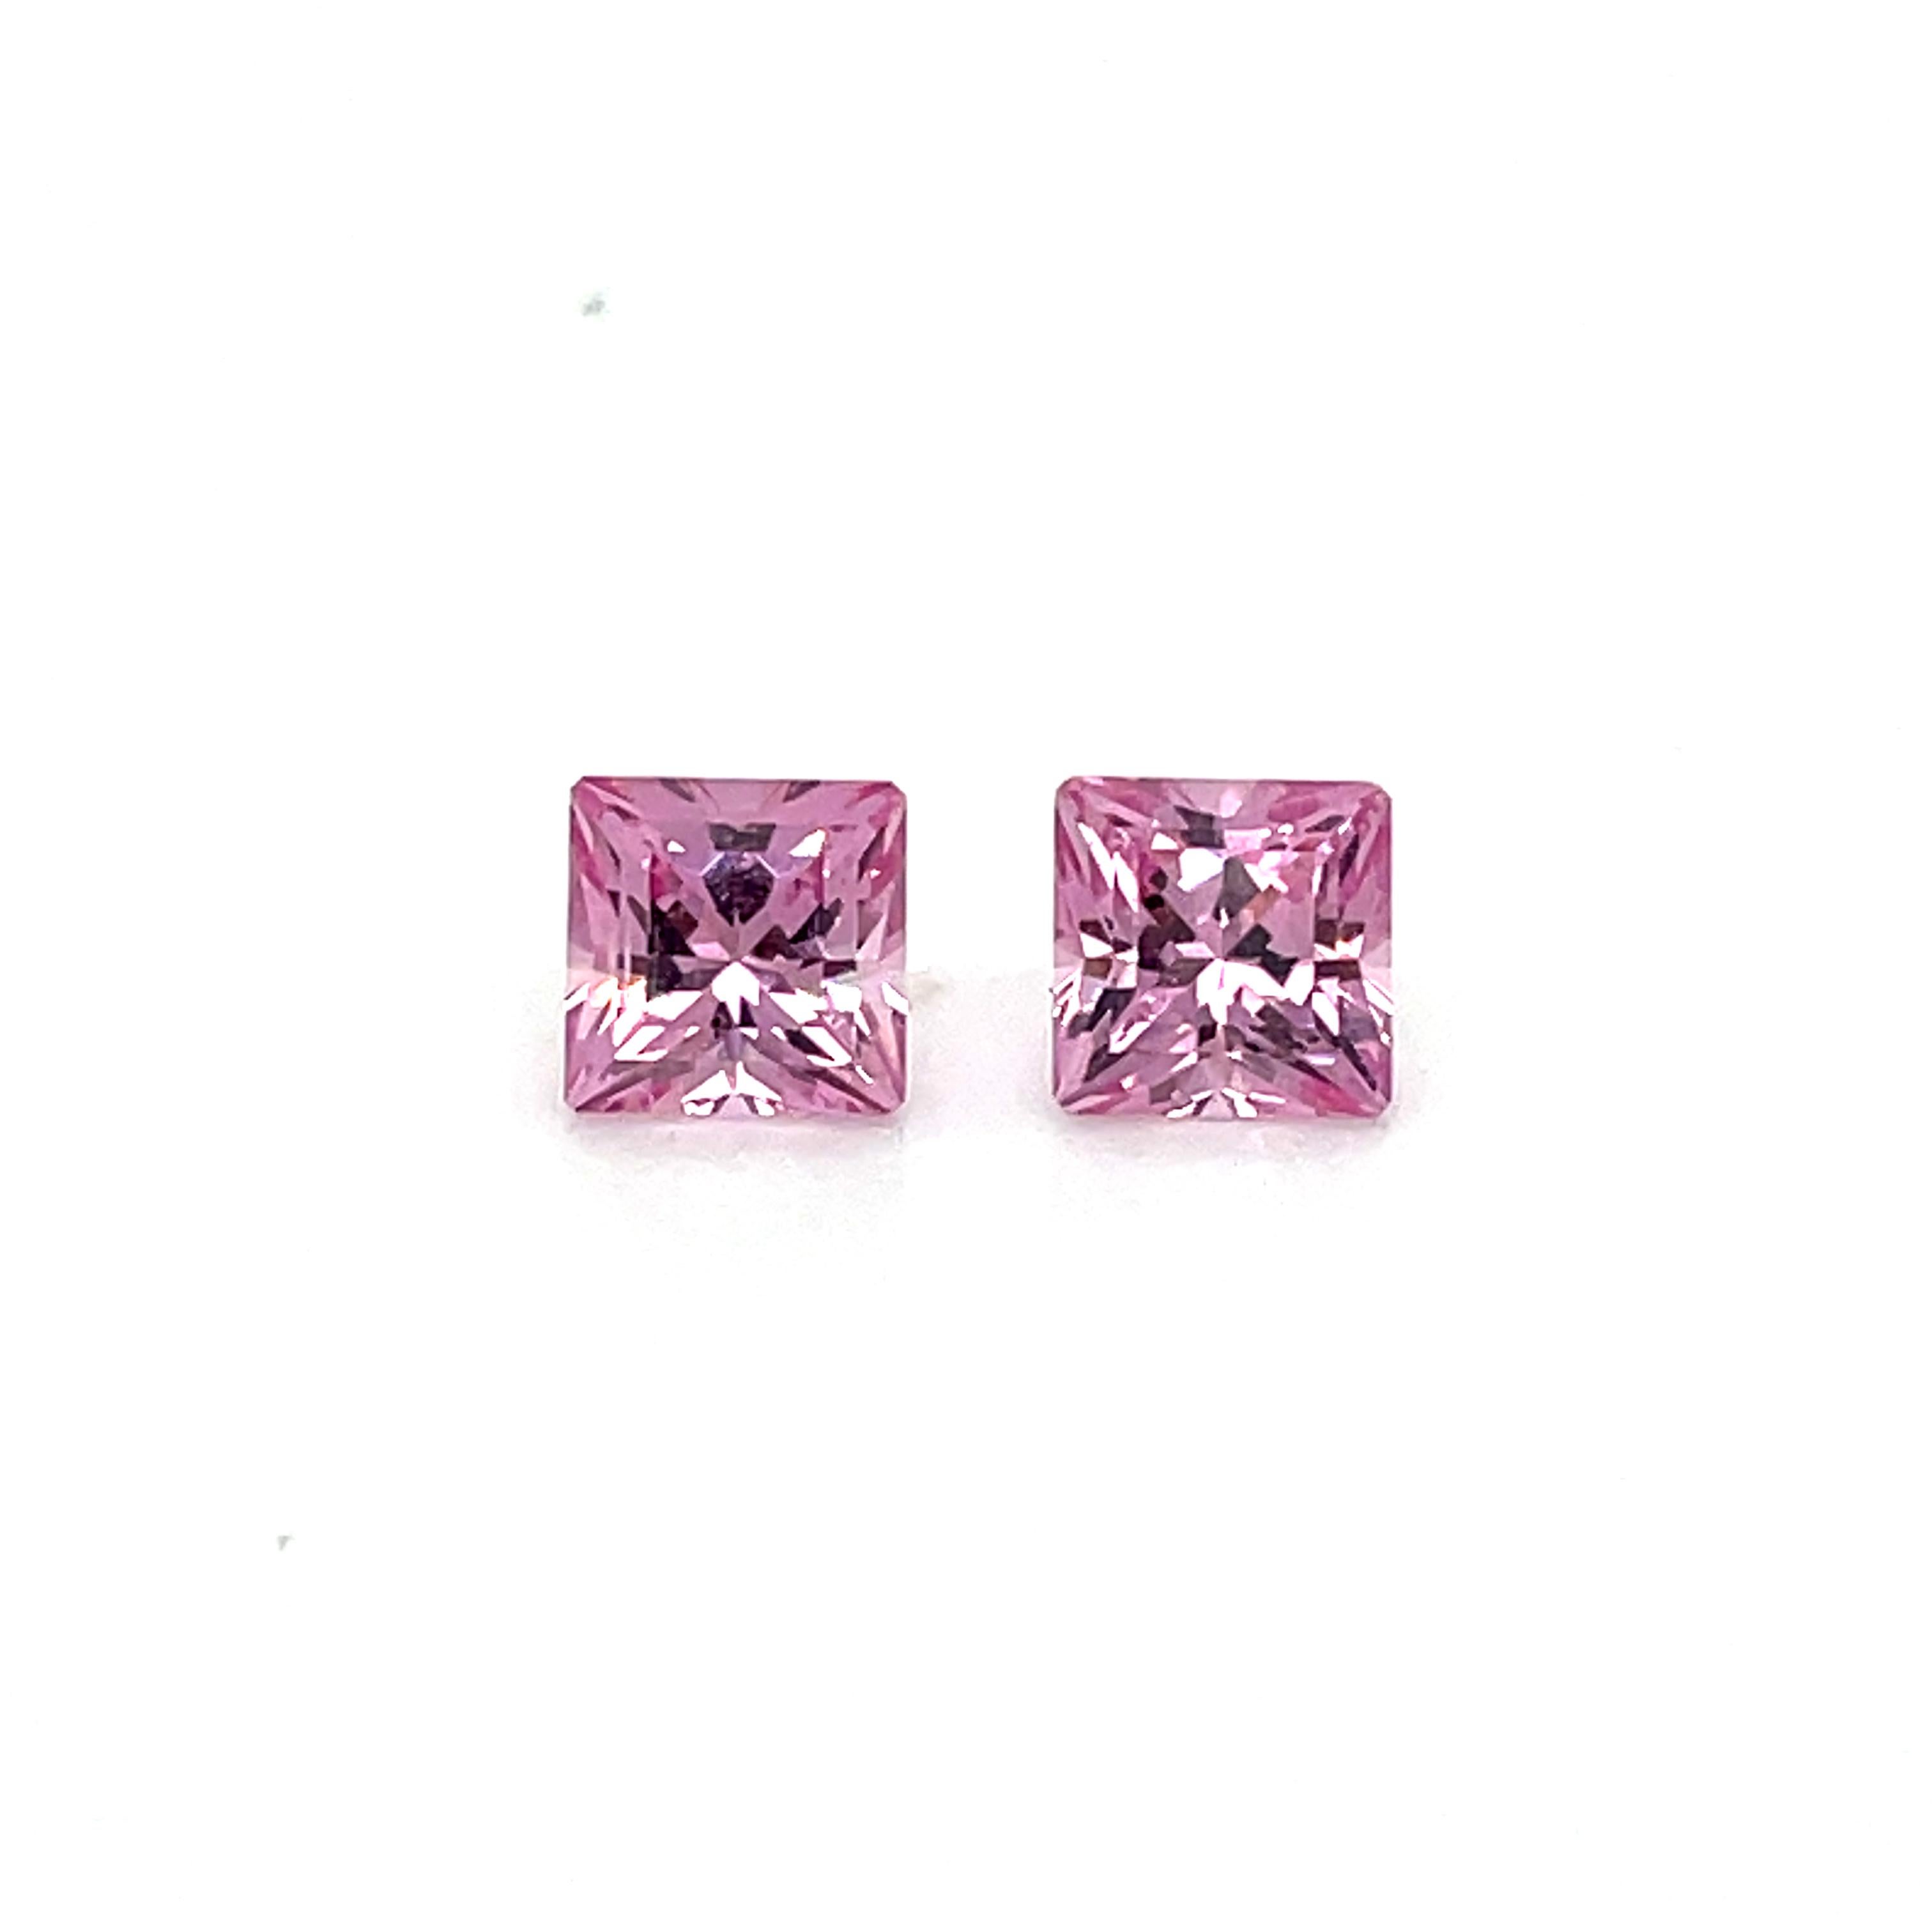 Get ready to be mesmerized by these exquisite gems' unmatched beauty. 

With a total carat weight of 2.18, these pink spinel princess-cut stones are a rare find indeed. 

They stand out from the crowd with their vivid pink color and precise princess